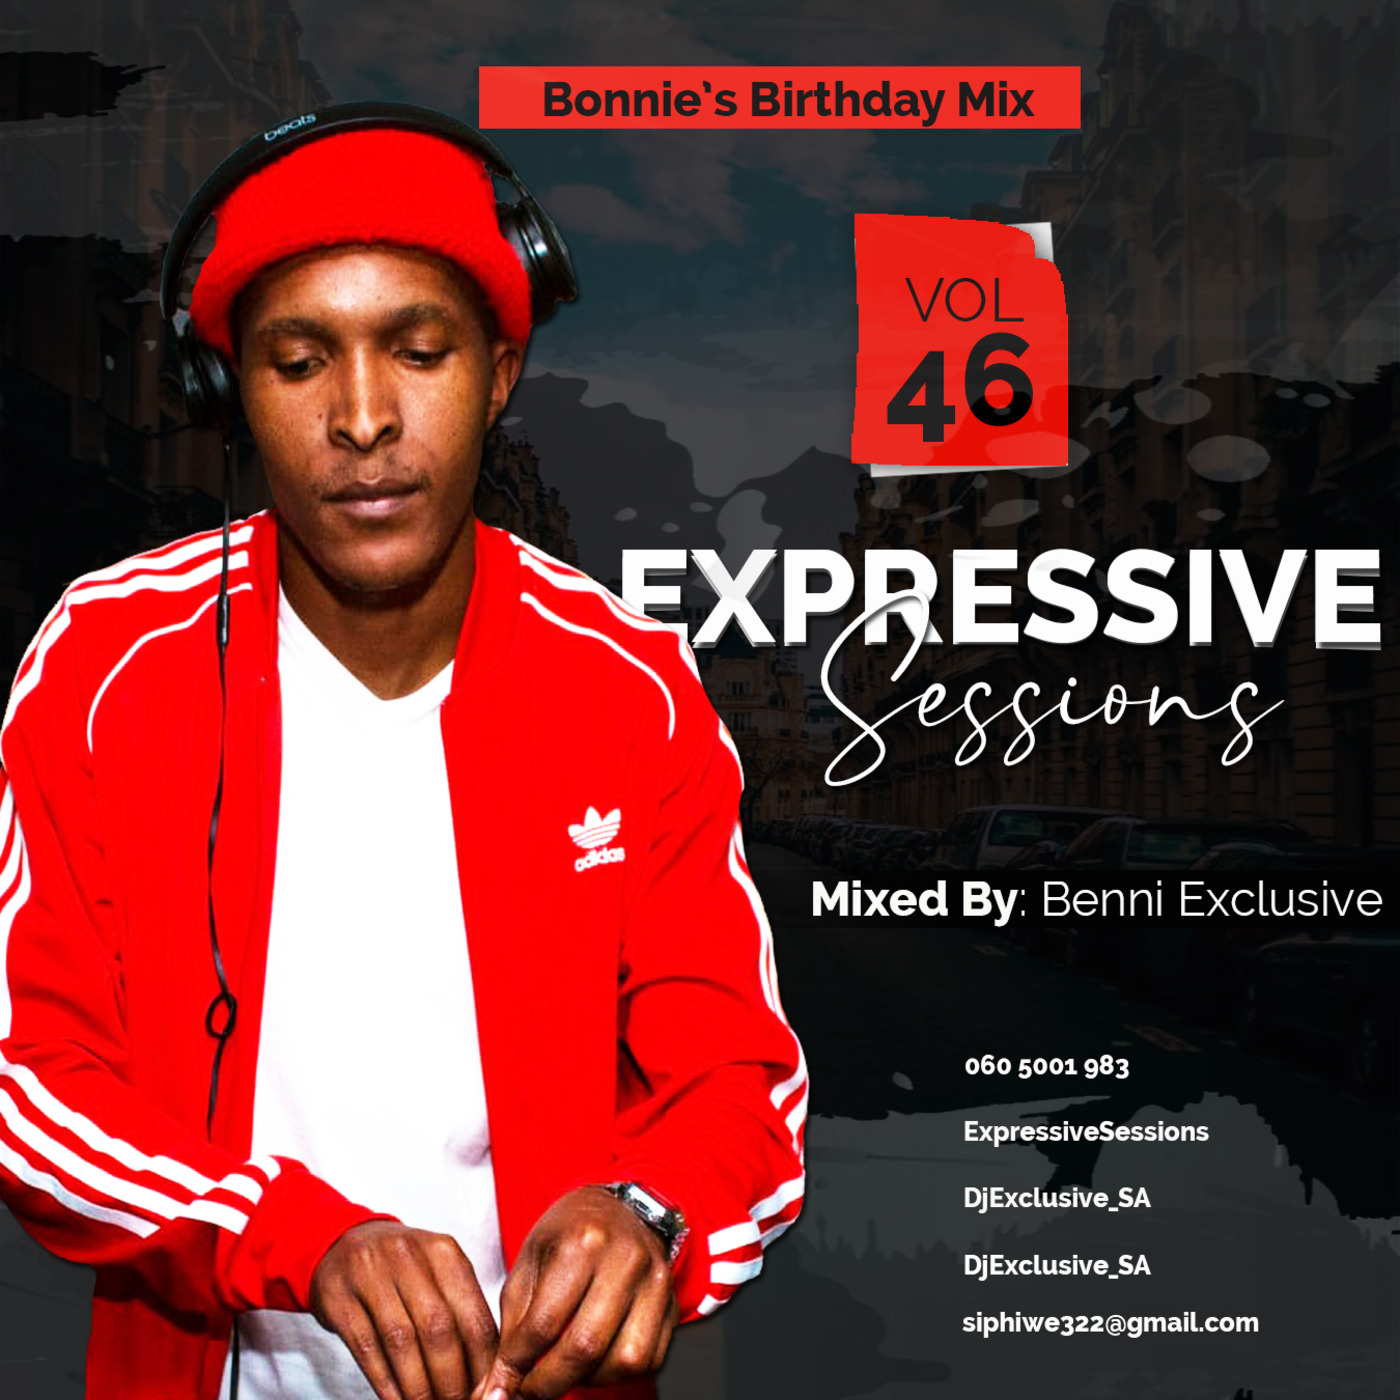 Expressive Sessions #46 Mixed By Benni Exclusive (Bonnie's Birthday Mix)